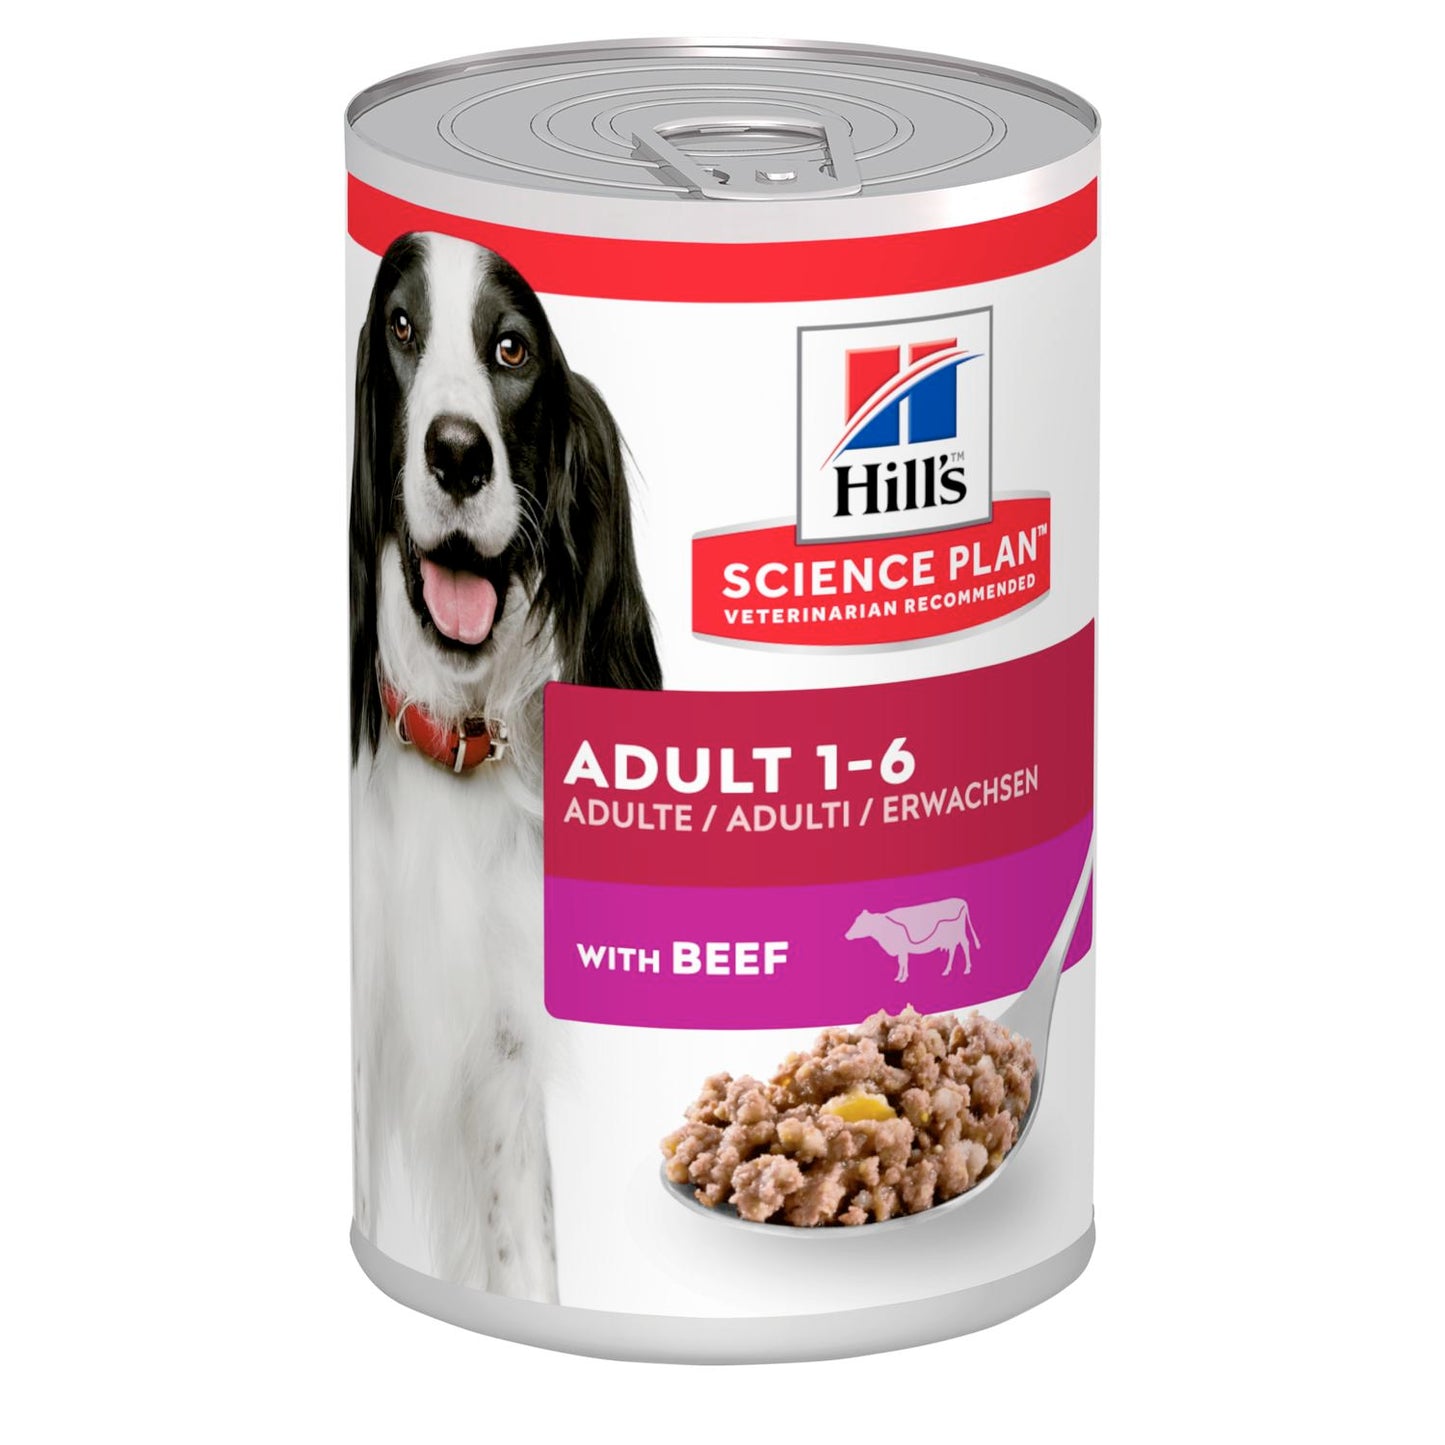 HILL'S SCIENCE PLAN Adult Dog Food with Beef - Targa Pet Shop